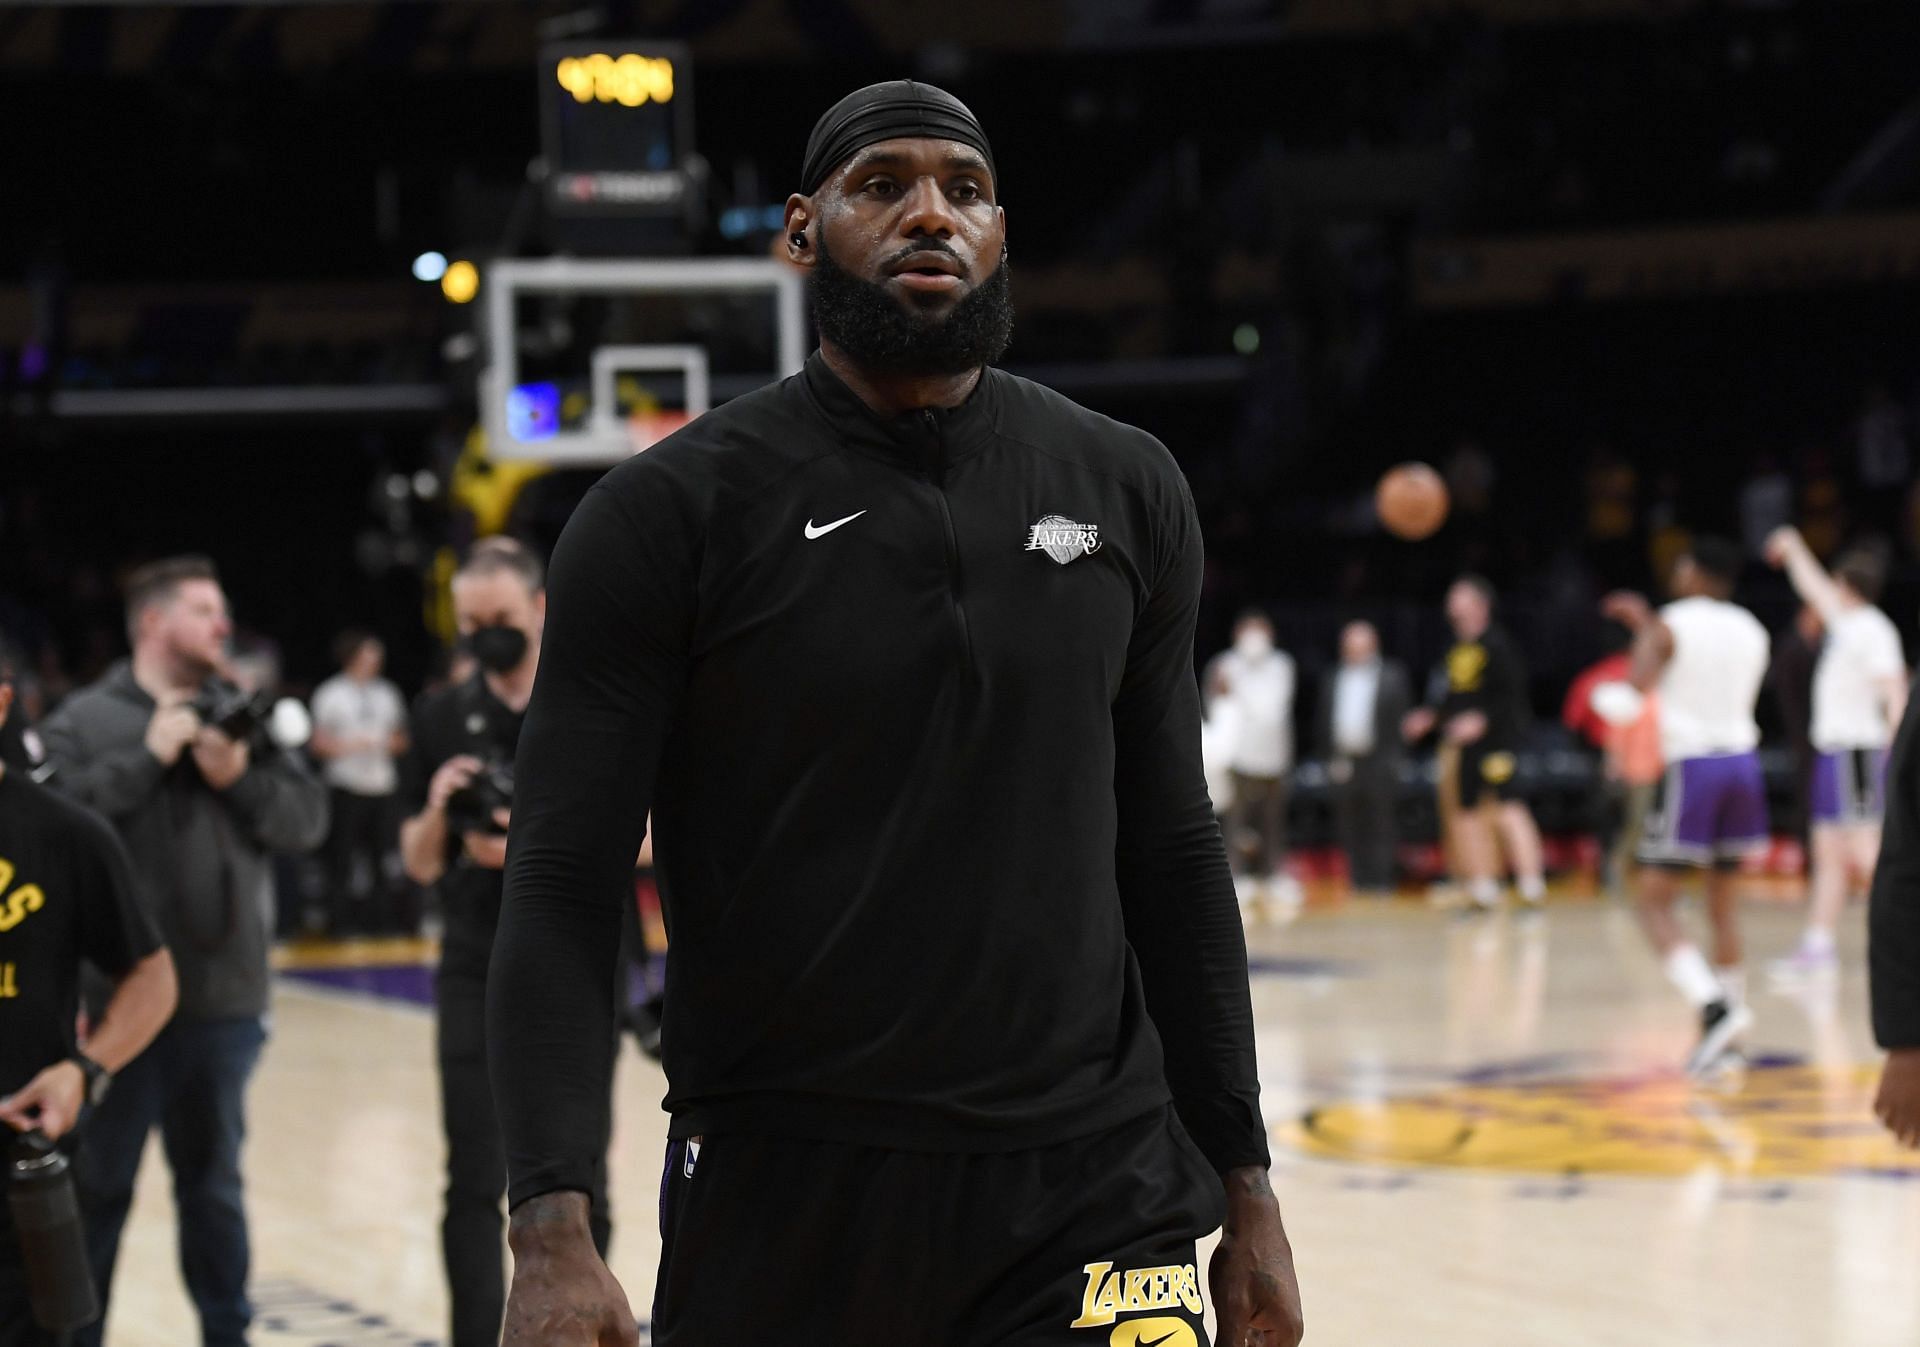 LeBron James is a father of three children